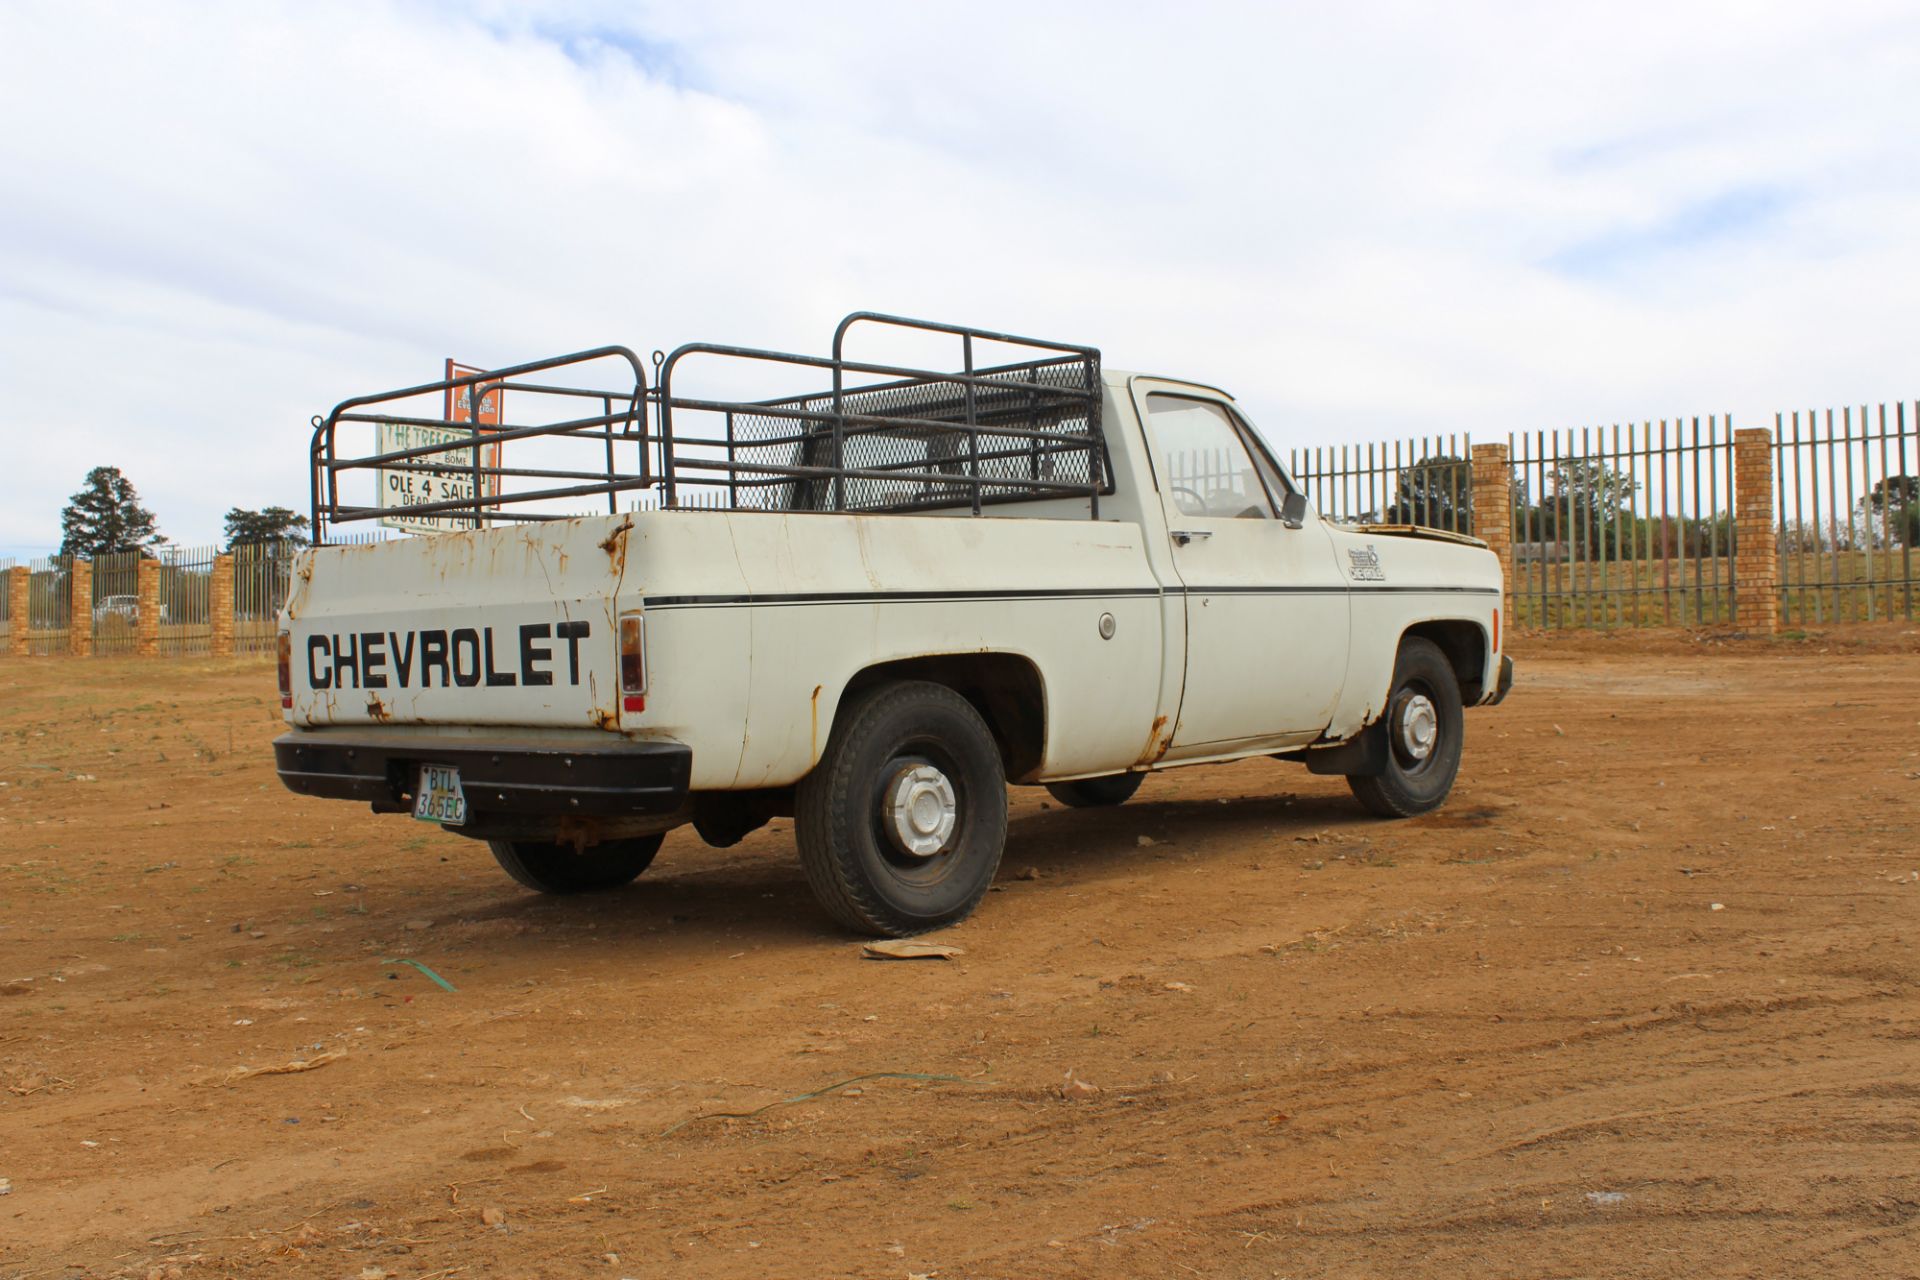 1974 CHEV SINGLE AXLE PICK-UP C10 - Image 4 of 6